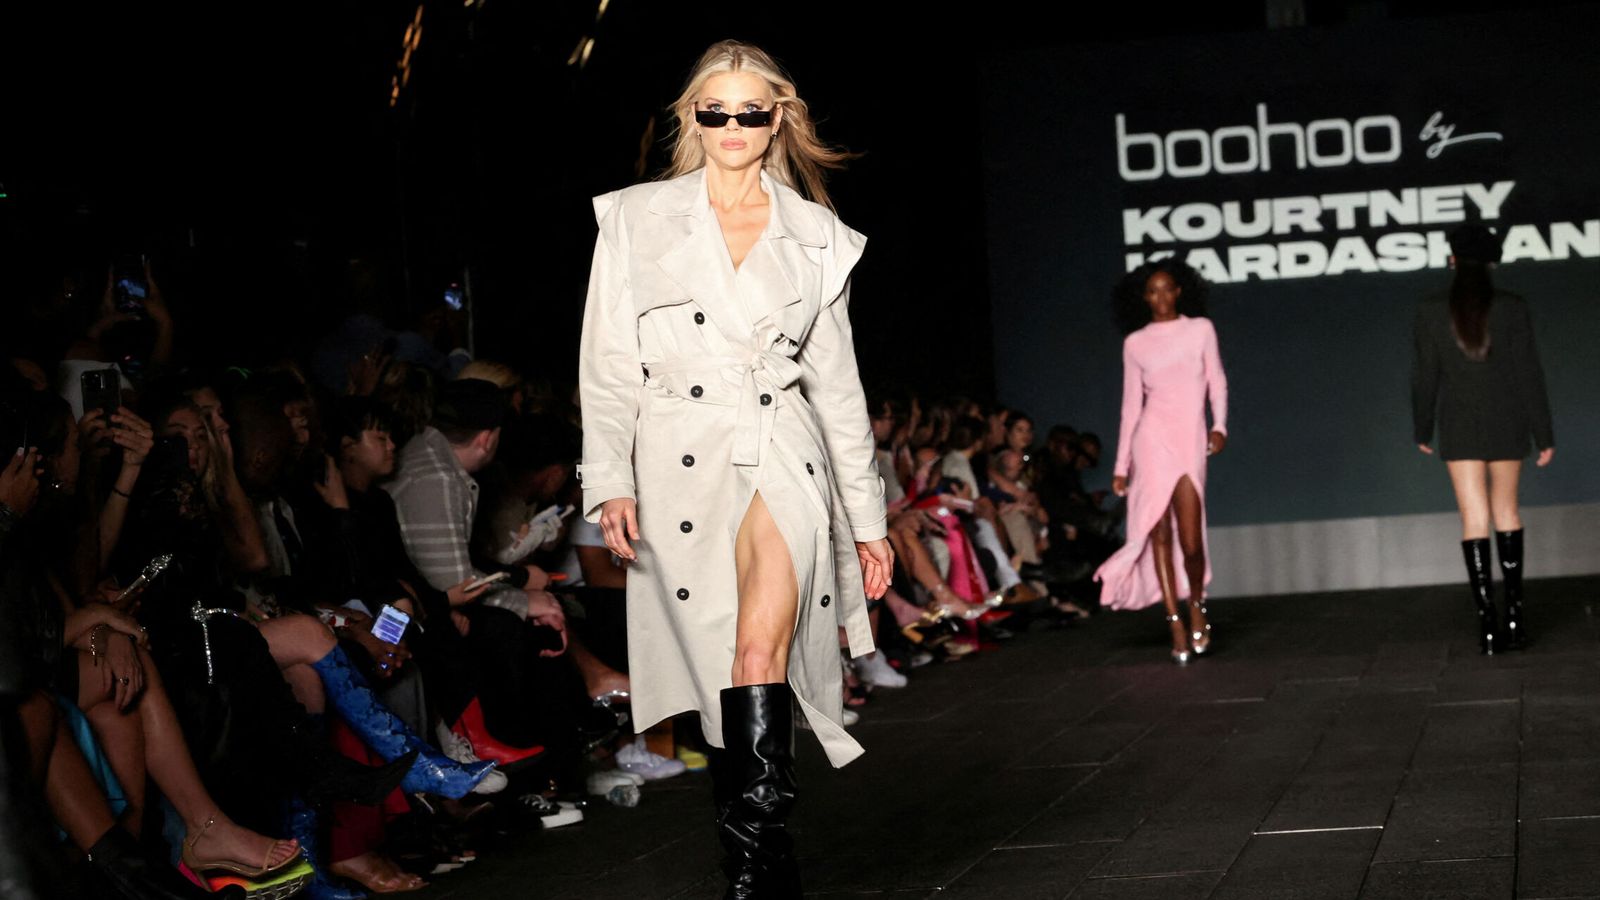 FILE PHOTO: Models present creations by Boohoo X Kourtney Kardashian at the High Line during New York Fashion Week in Manhattan, New York City, U.S., September 13, 2022. REUTERS Caitlin Ochs File Photo